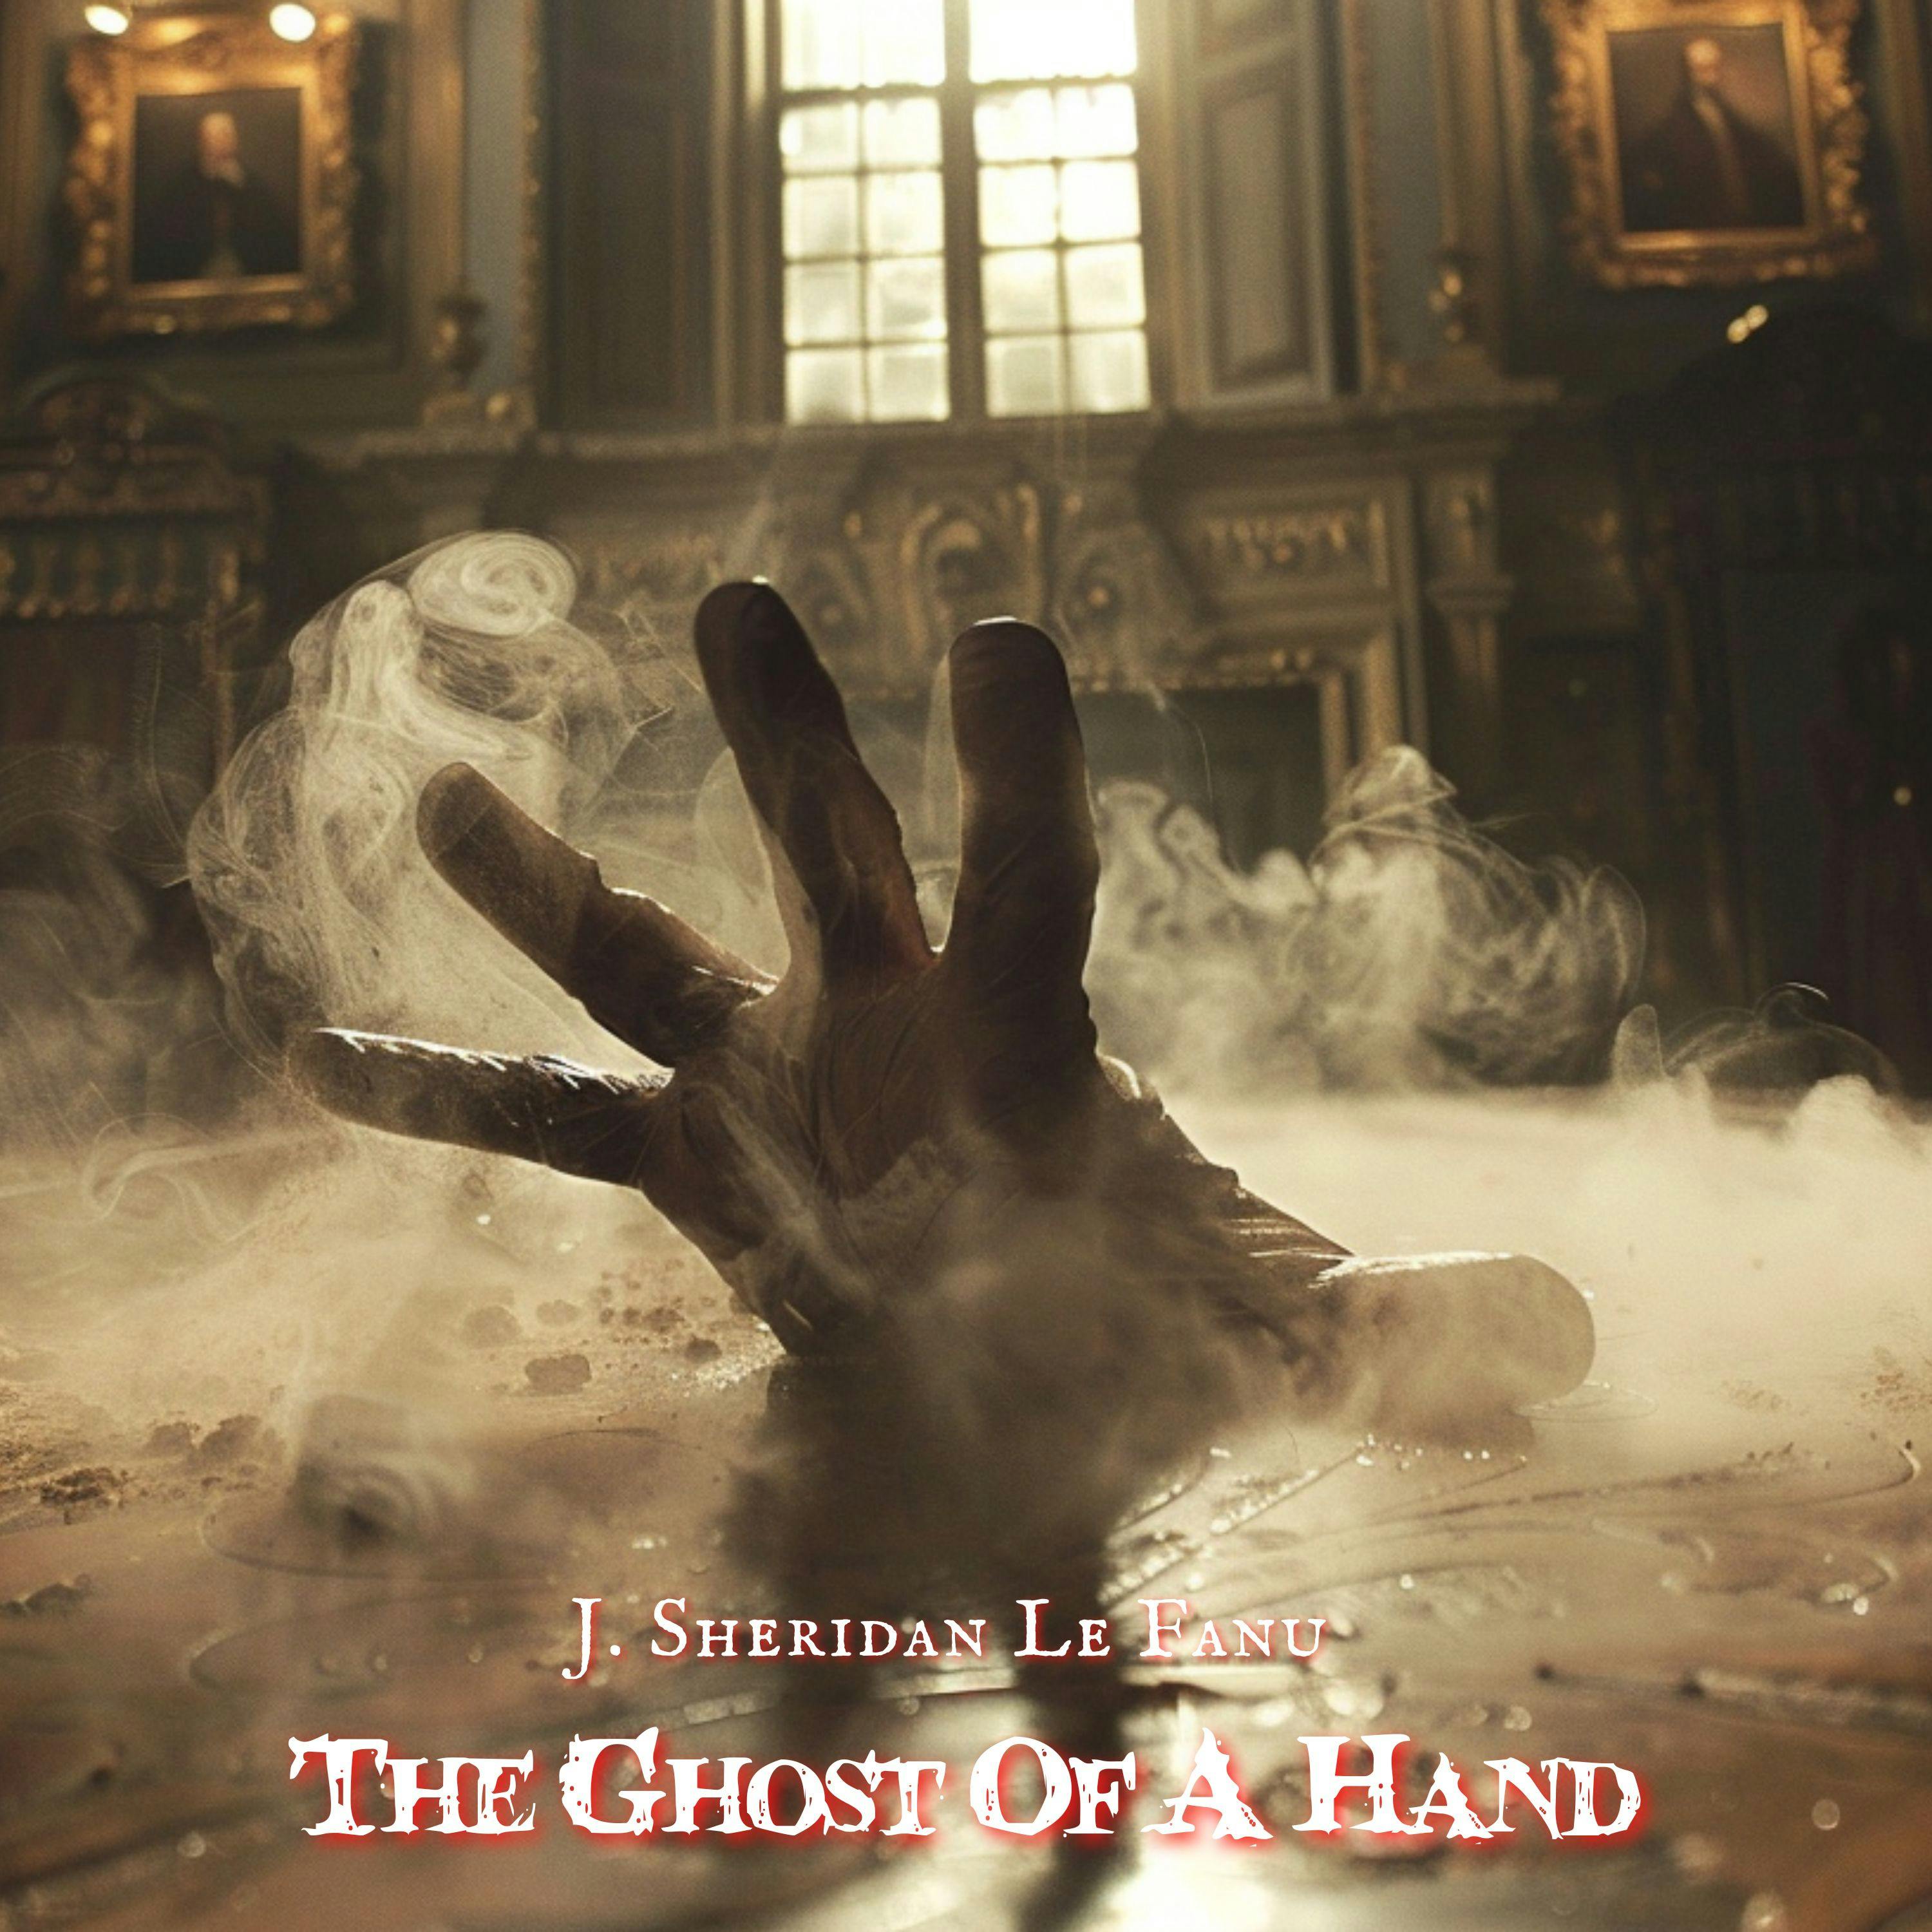 The Ghost of A Hand by J. Sheridan Le Fanu